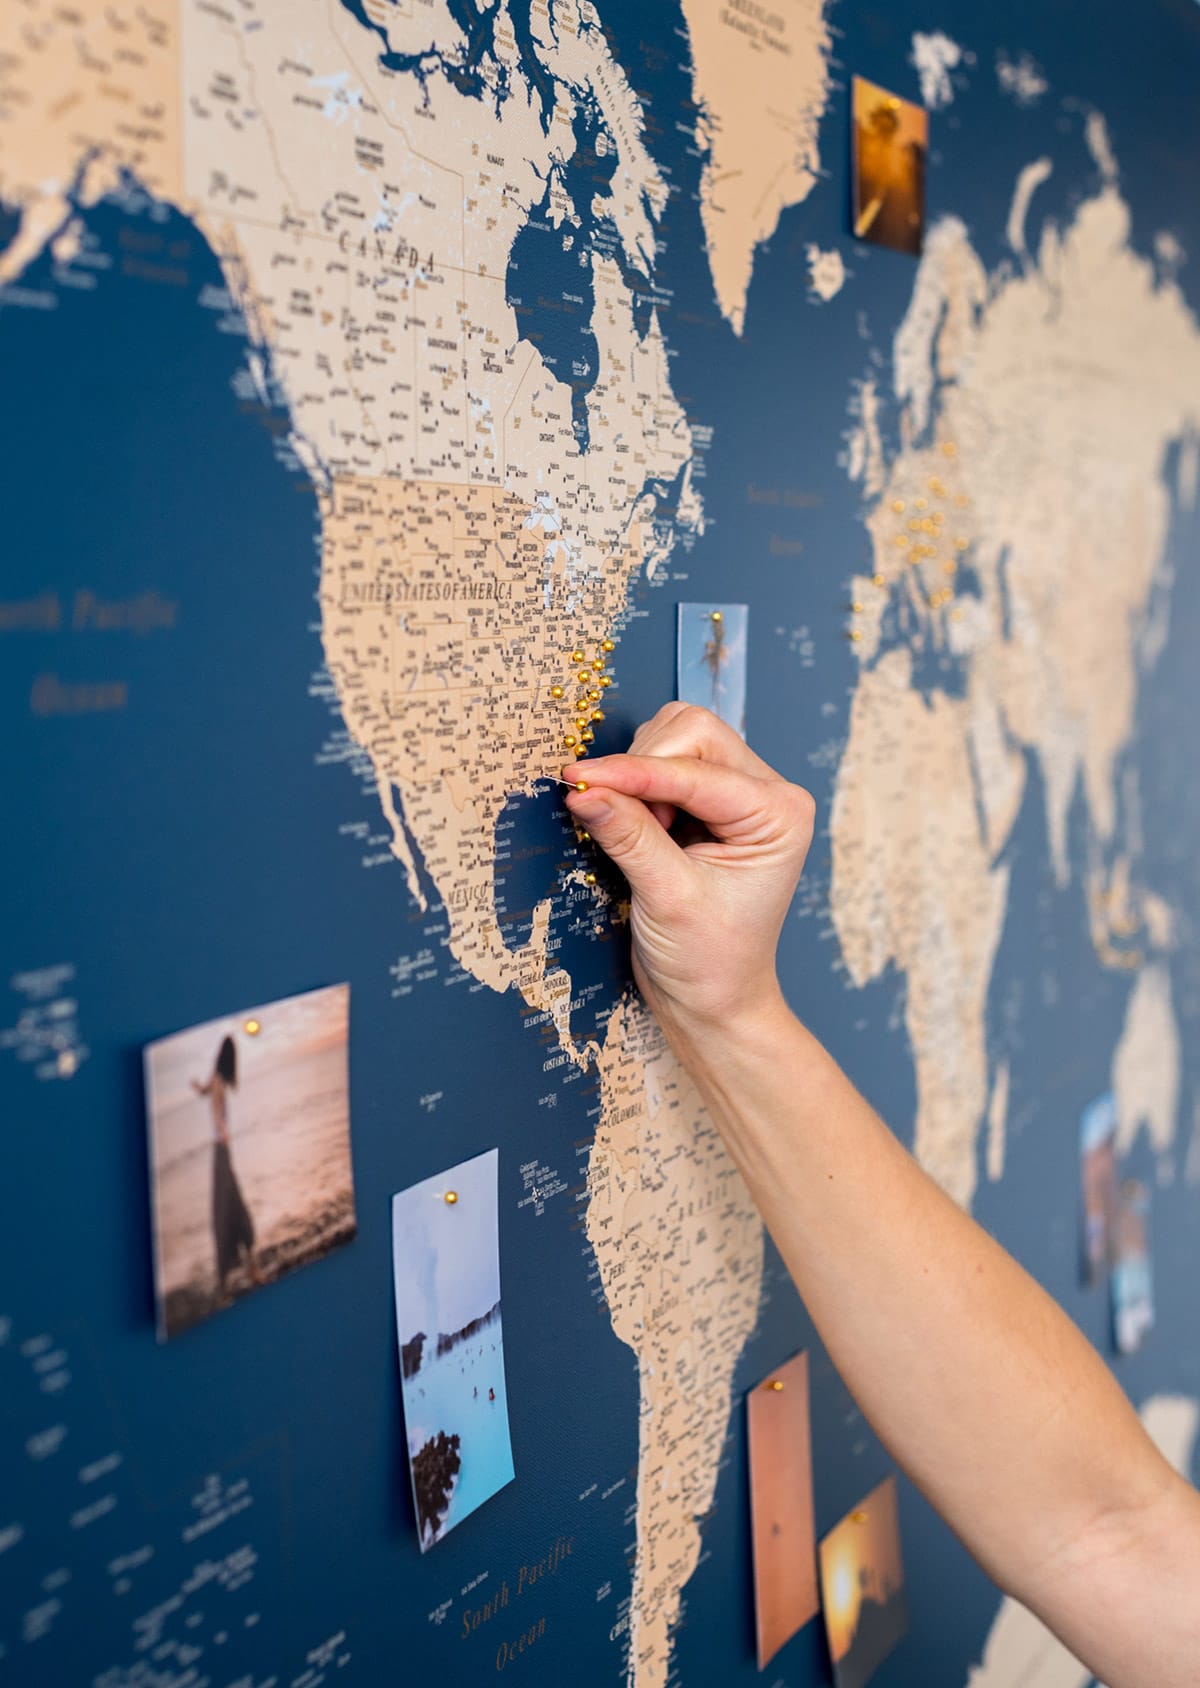 large travel map with pins near me